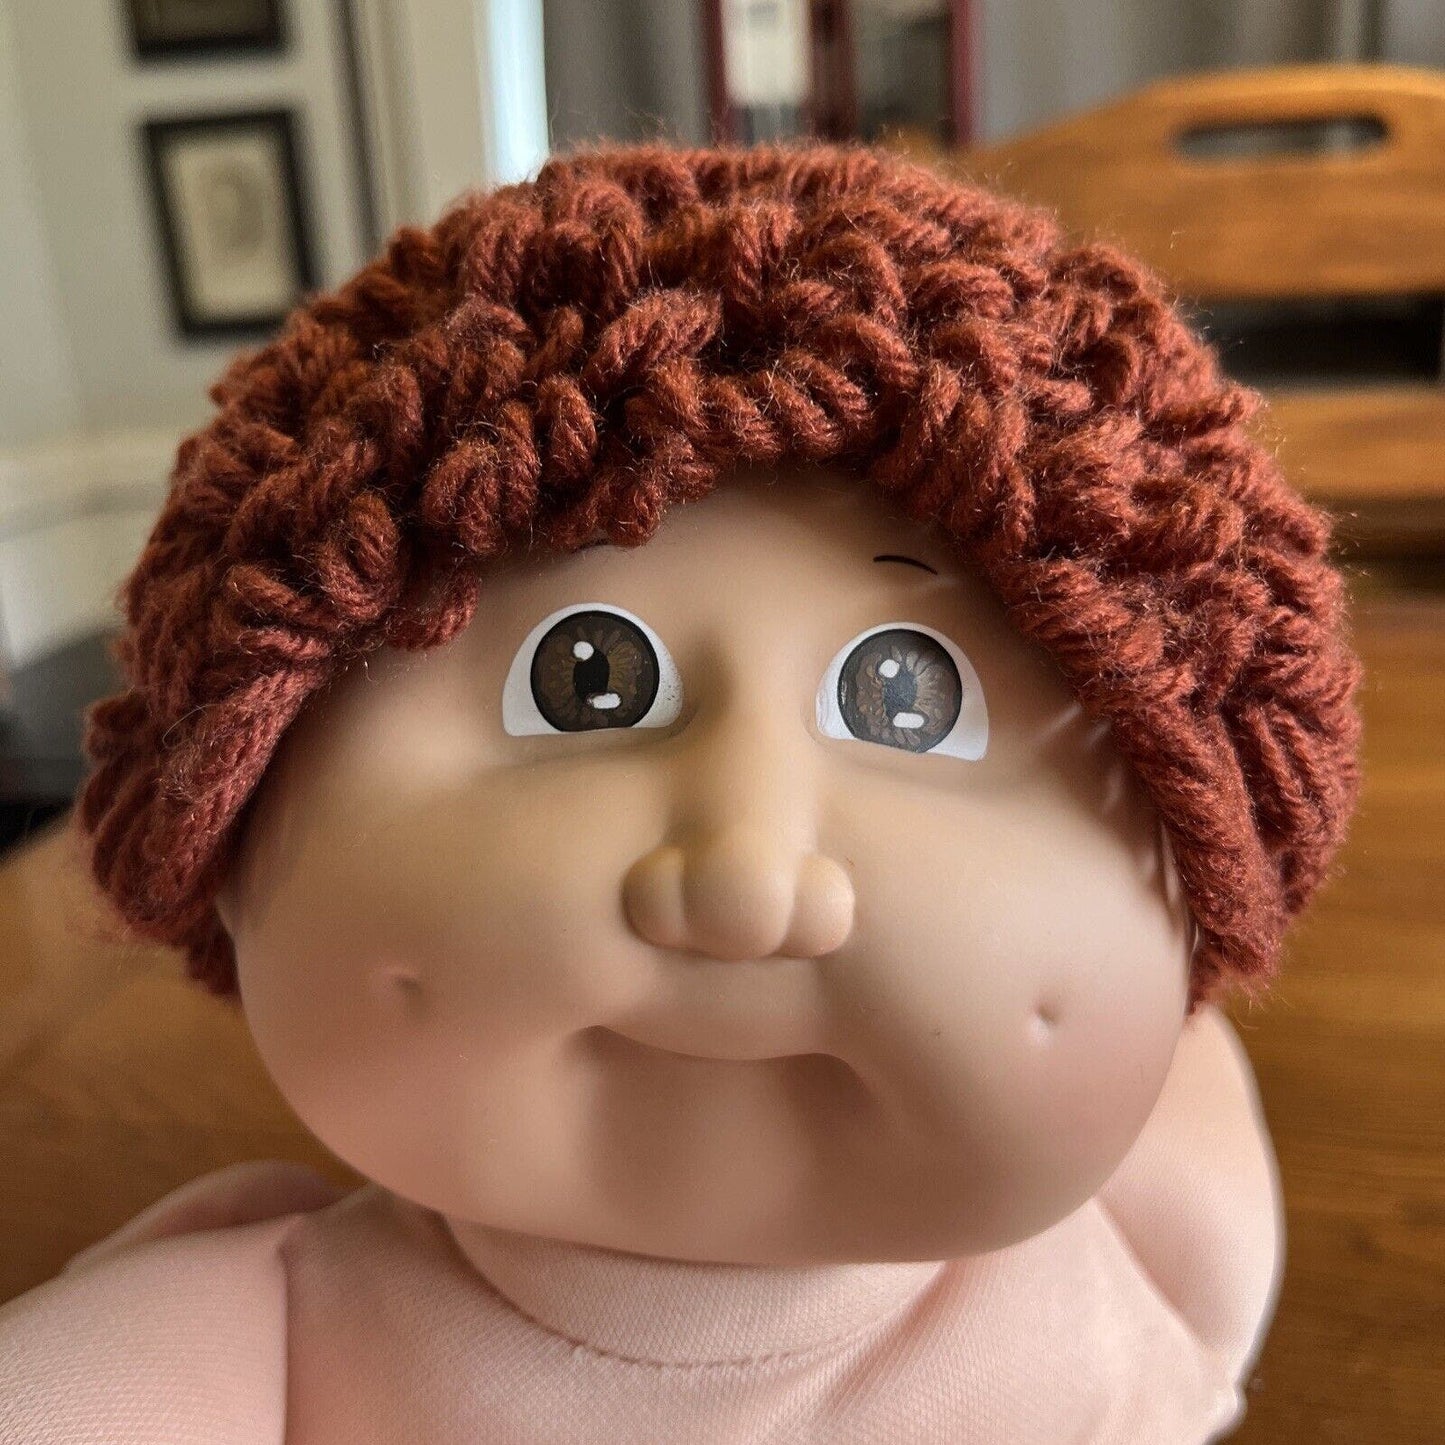 1980s Cabbage Patch Kid Auburn Hair Brown Eyes OK Pink & Red Strawberry Dress